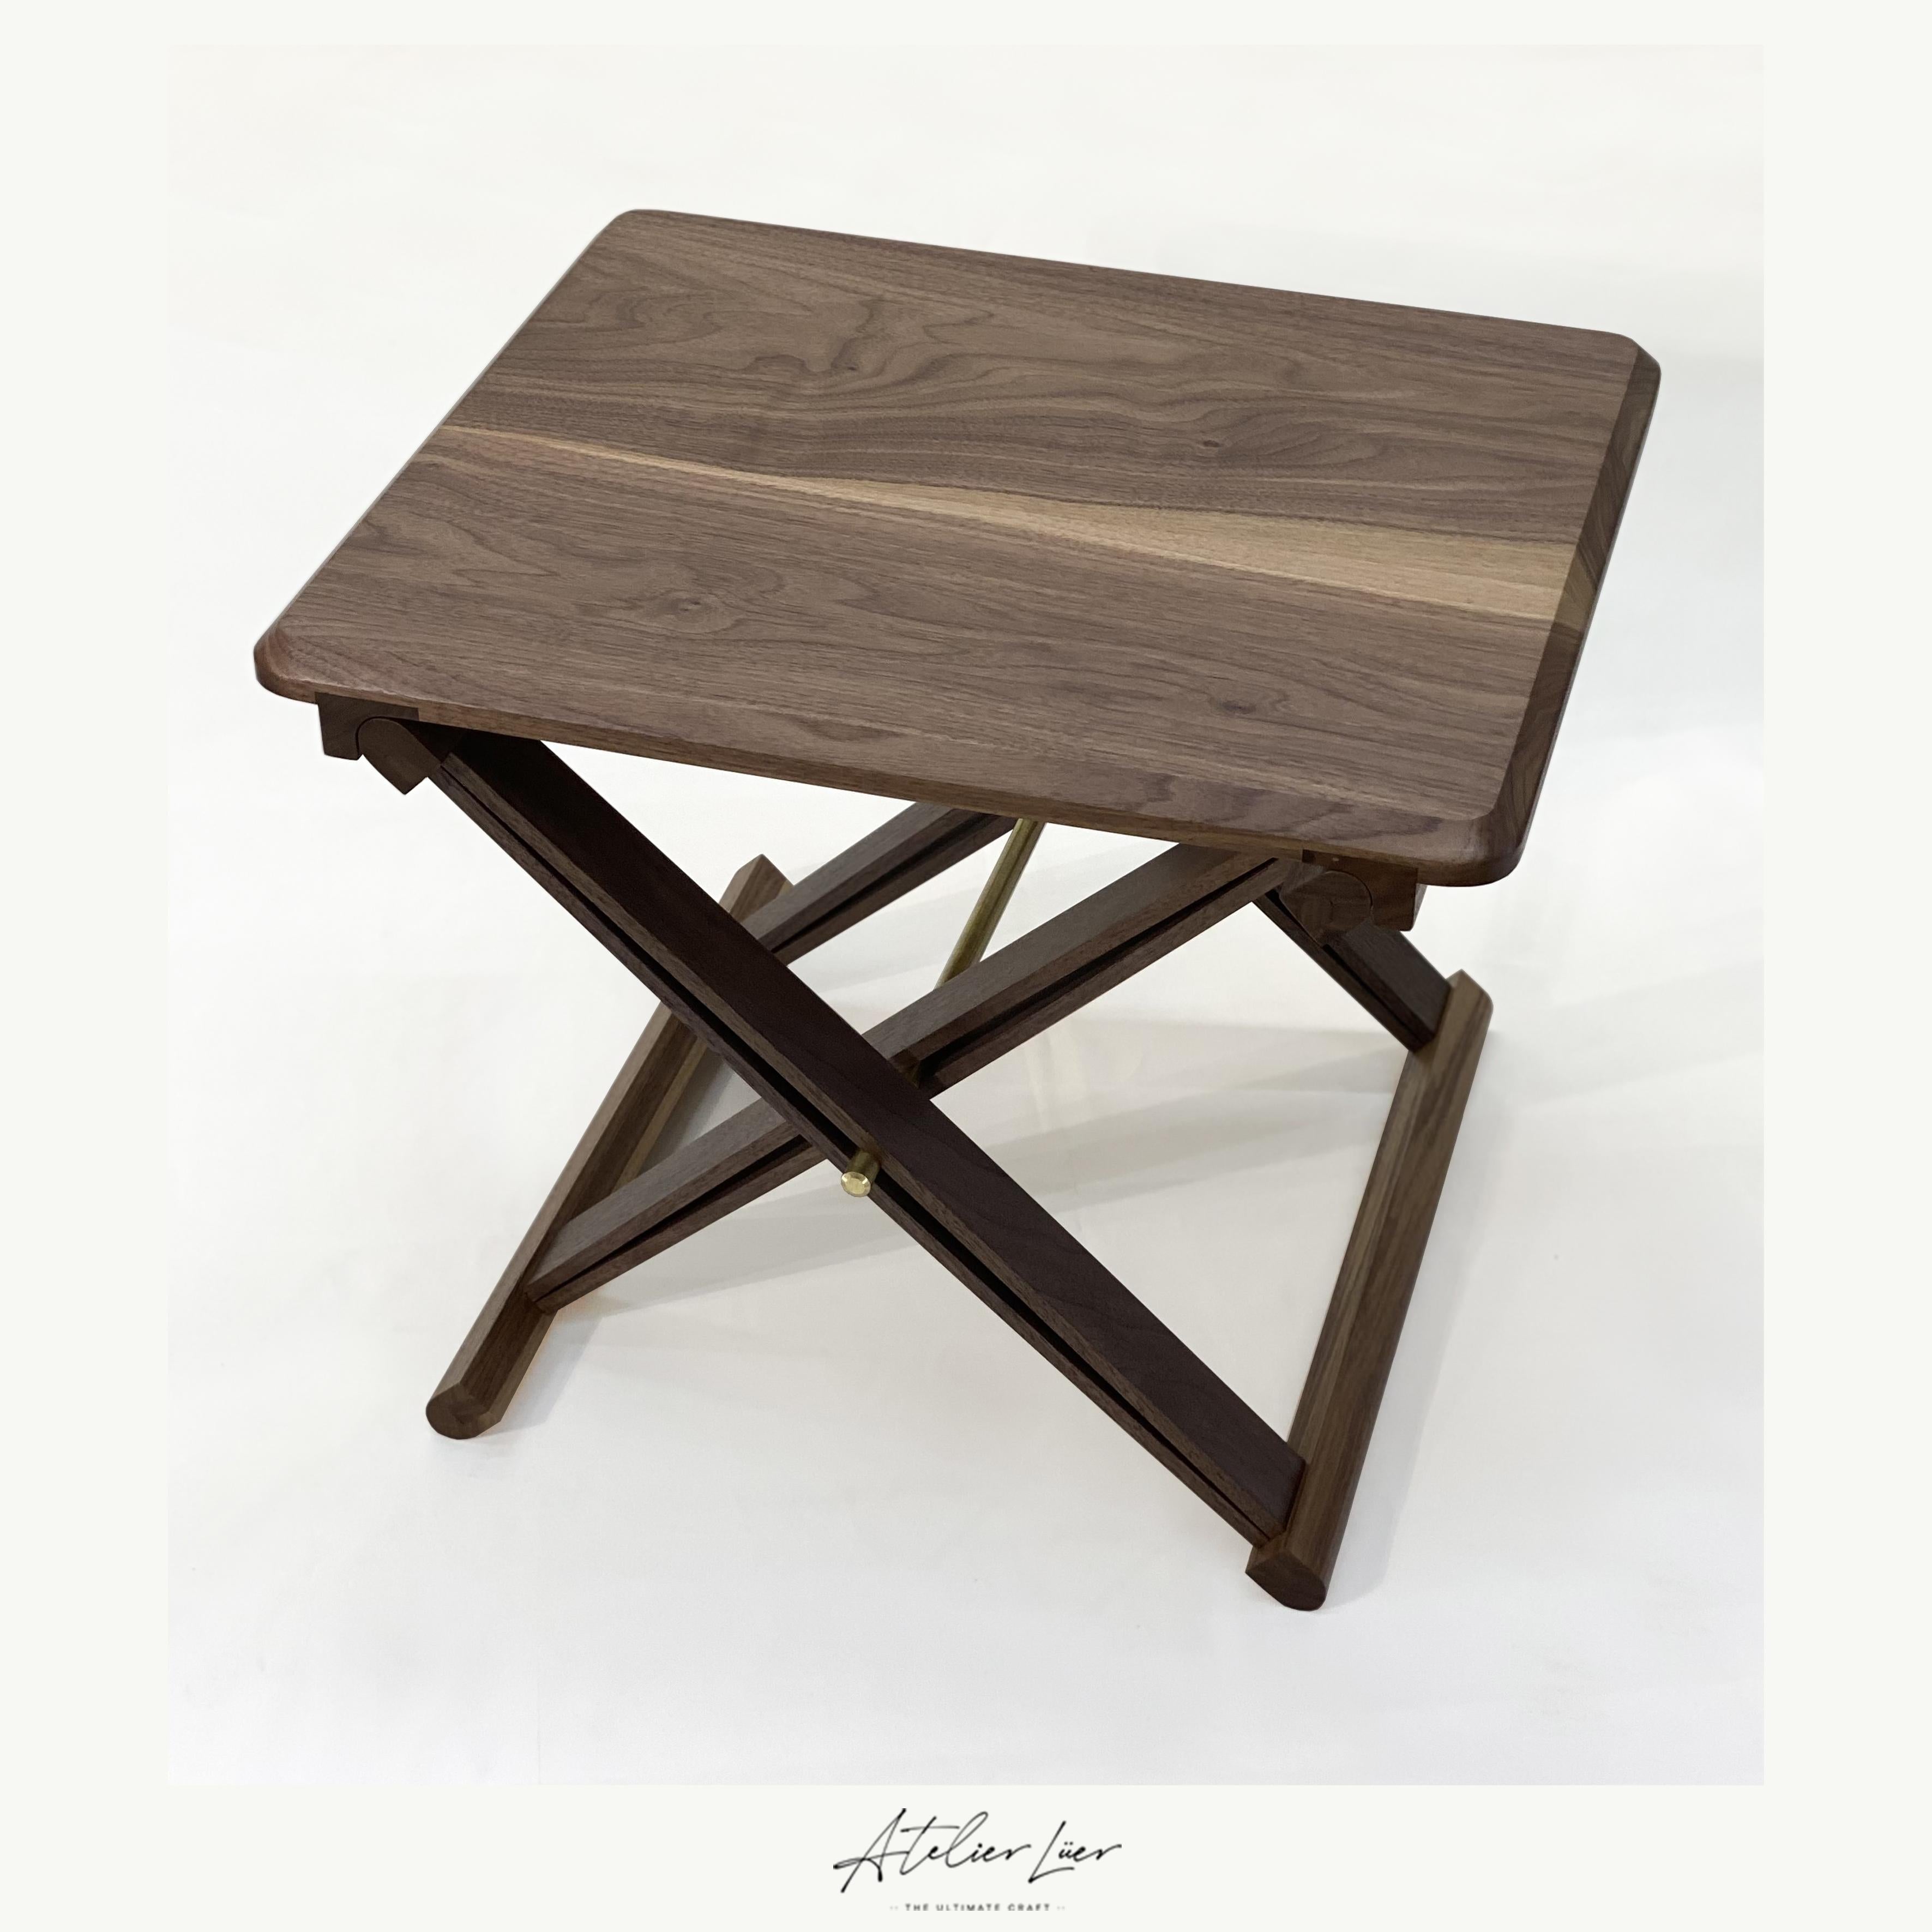 Atelier Luer Campaign Style Tray/Side Table with X-Frame Base and Leather Straps

Offered for sale is an Atelier Luer campaign style low tray/side table with and x-frame base secured with leather straps.  This table is custom made in our Seattle, WA